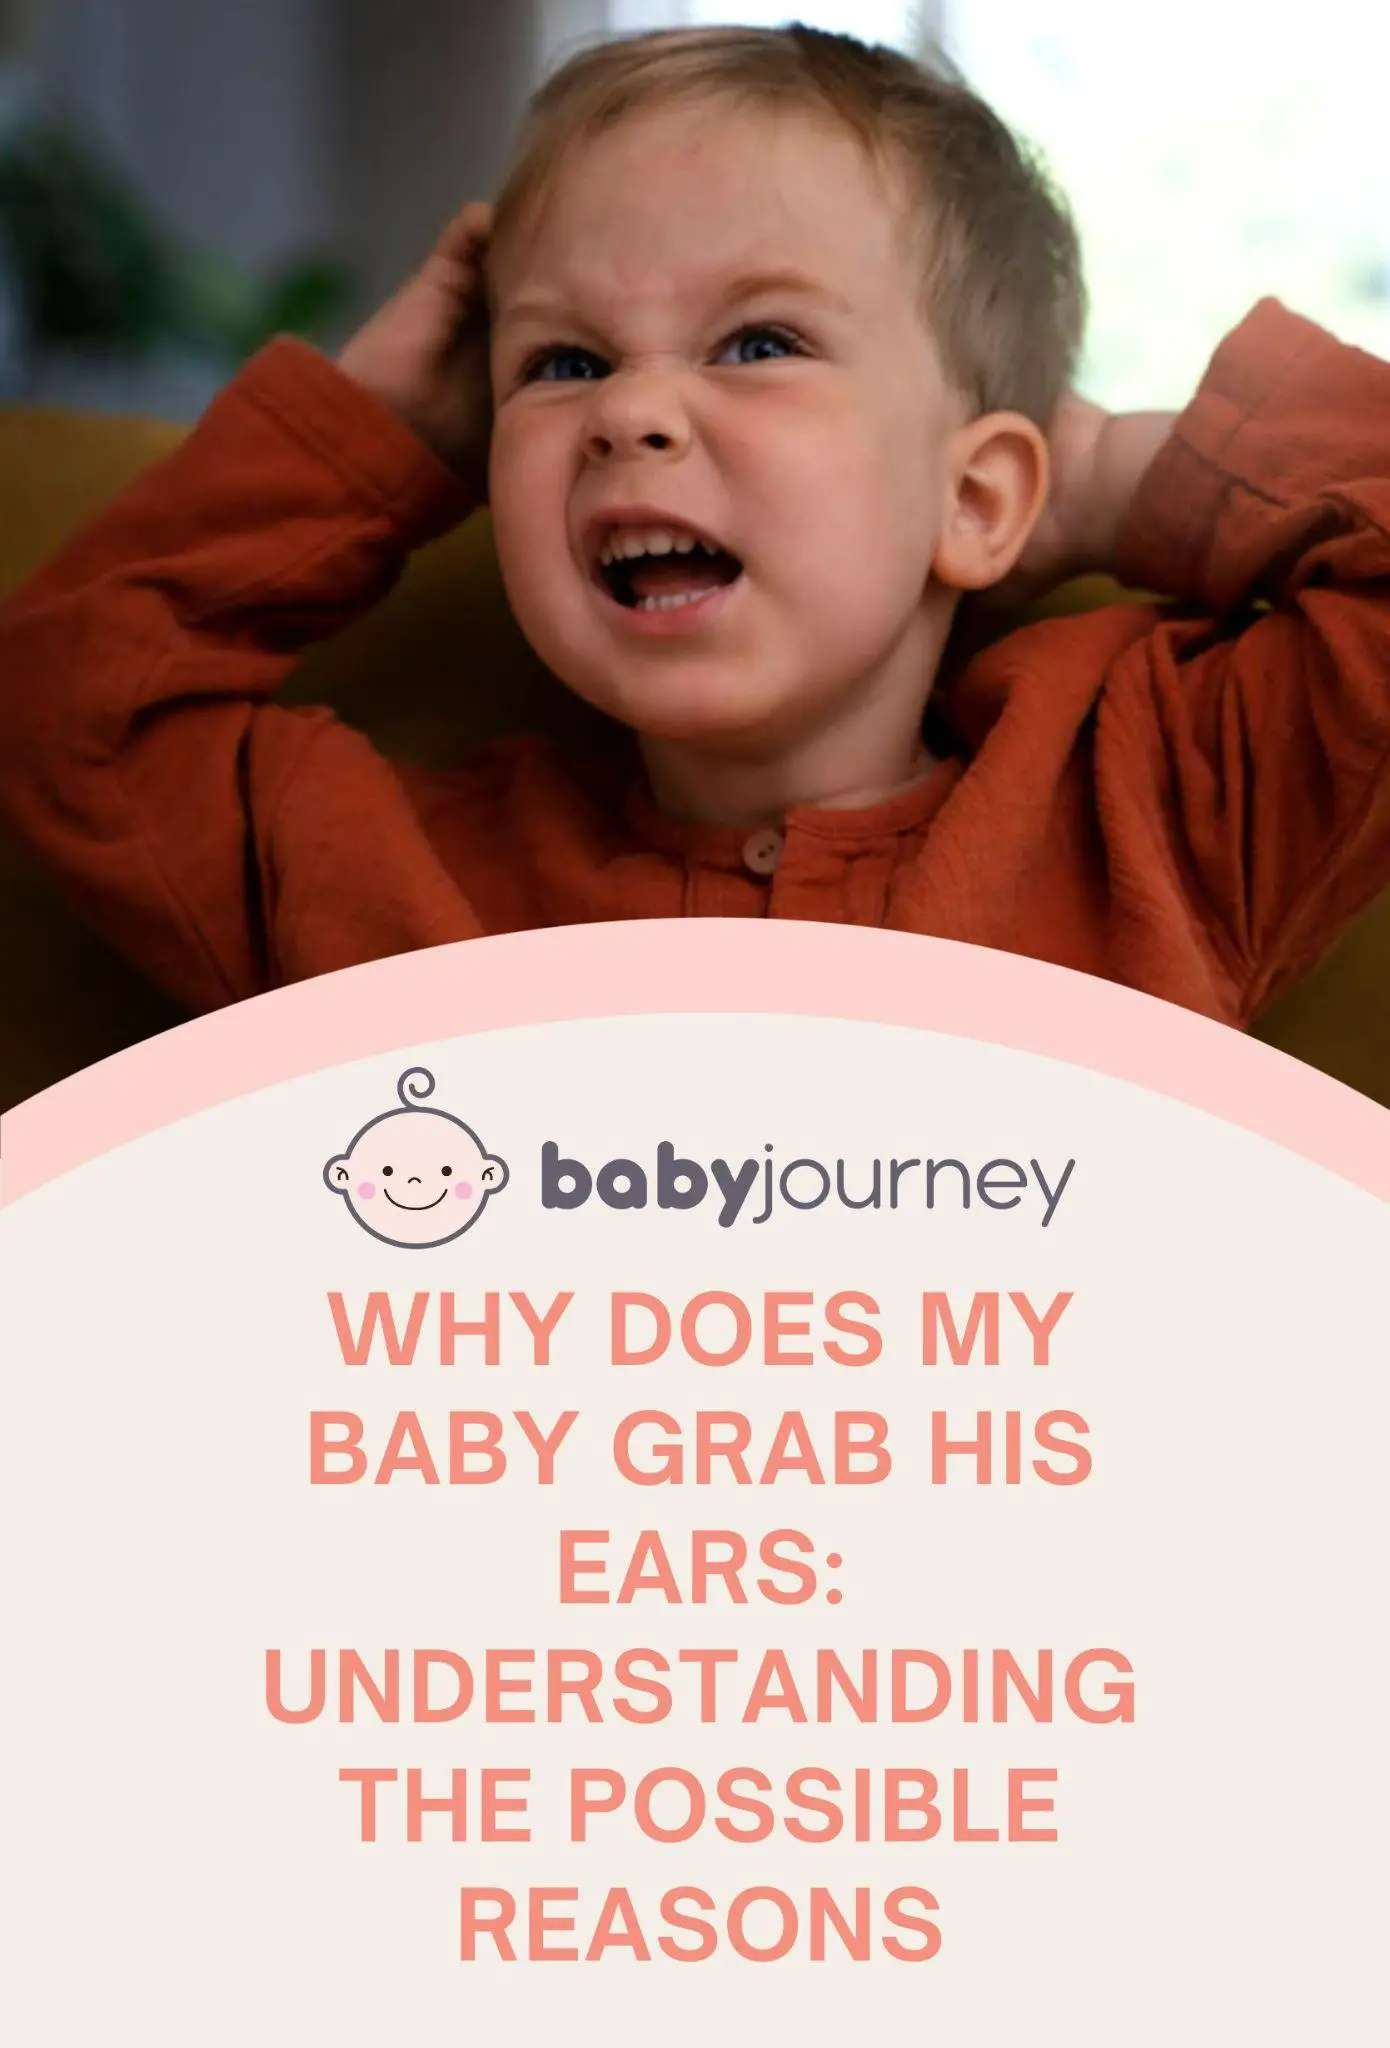 Why Does My Baby Grab His Ears: Understanding the Possible Reasons Pinterest Image - Baby Journey